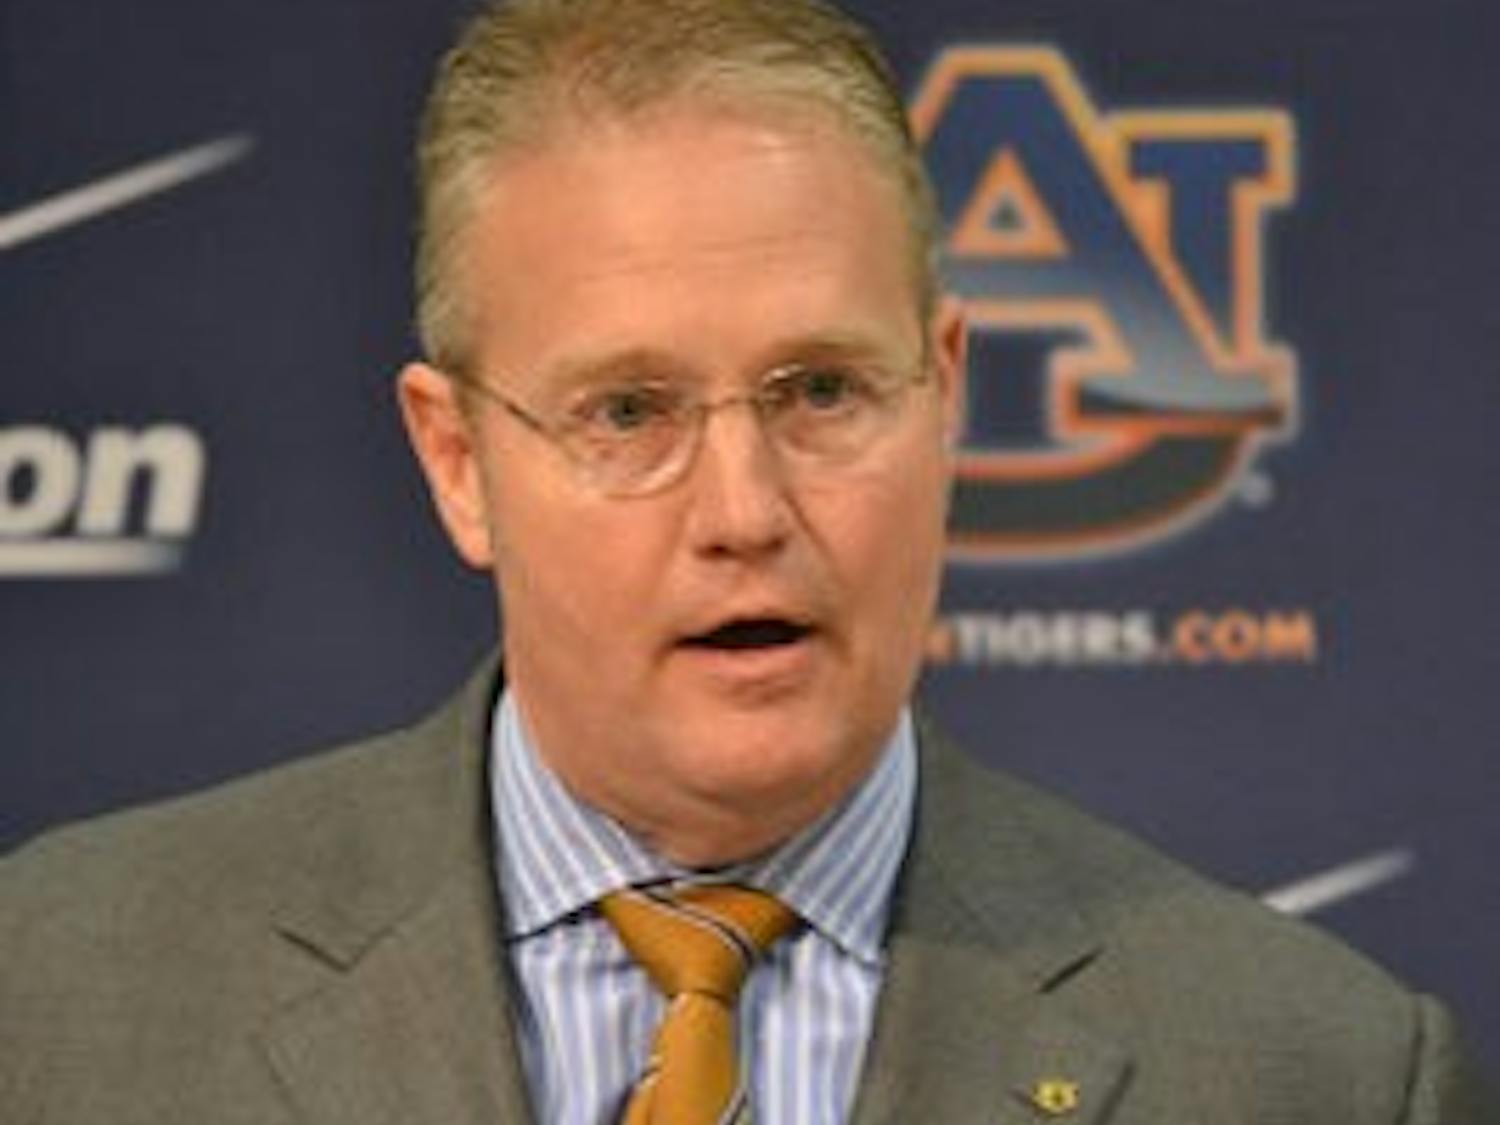 Jay Jacobs, Auburn director of athletics, spoke today about Gene Chizik and the future of the Auburn football program. (Danielle Lowe / ASSISTANT PHOTO EDITOR)